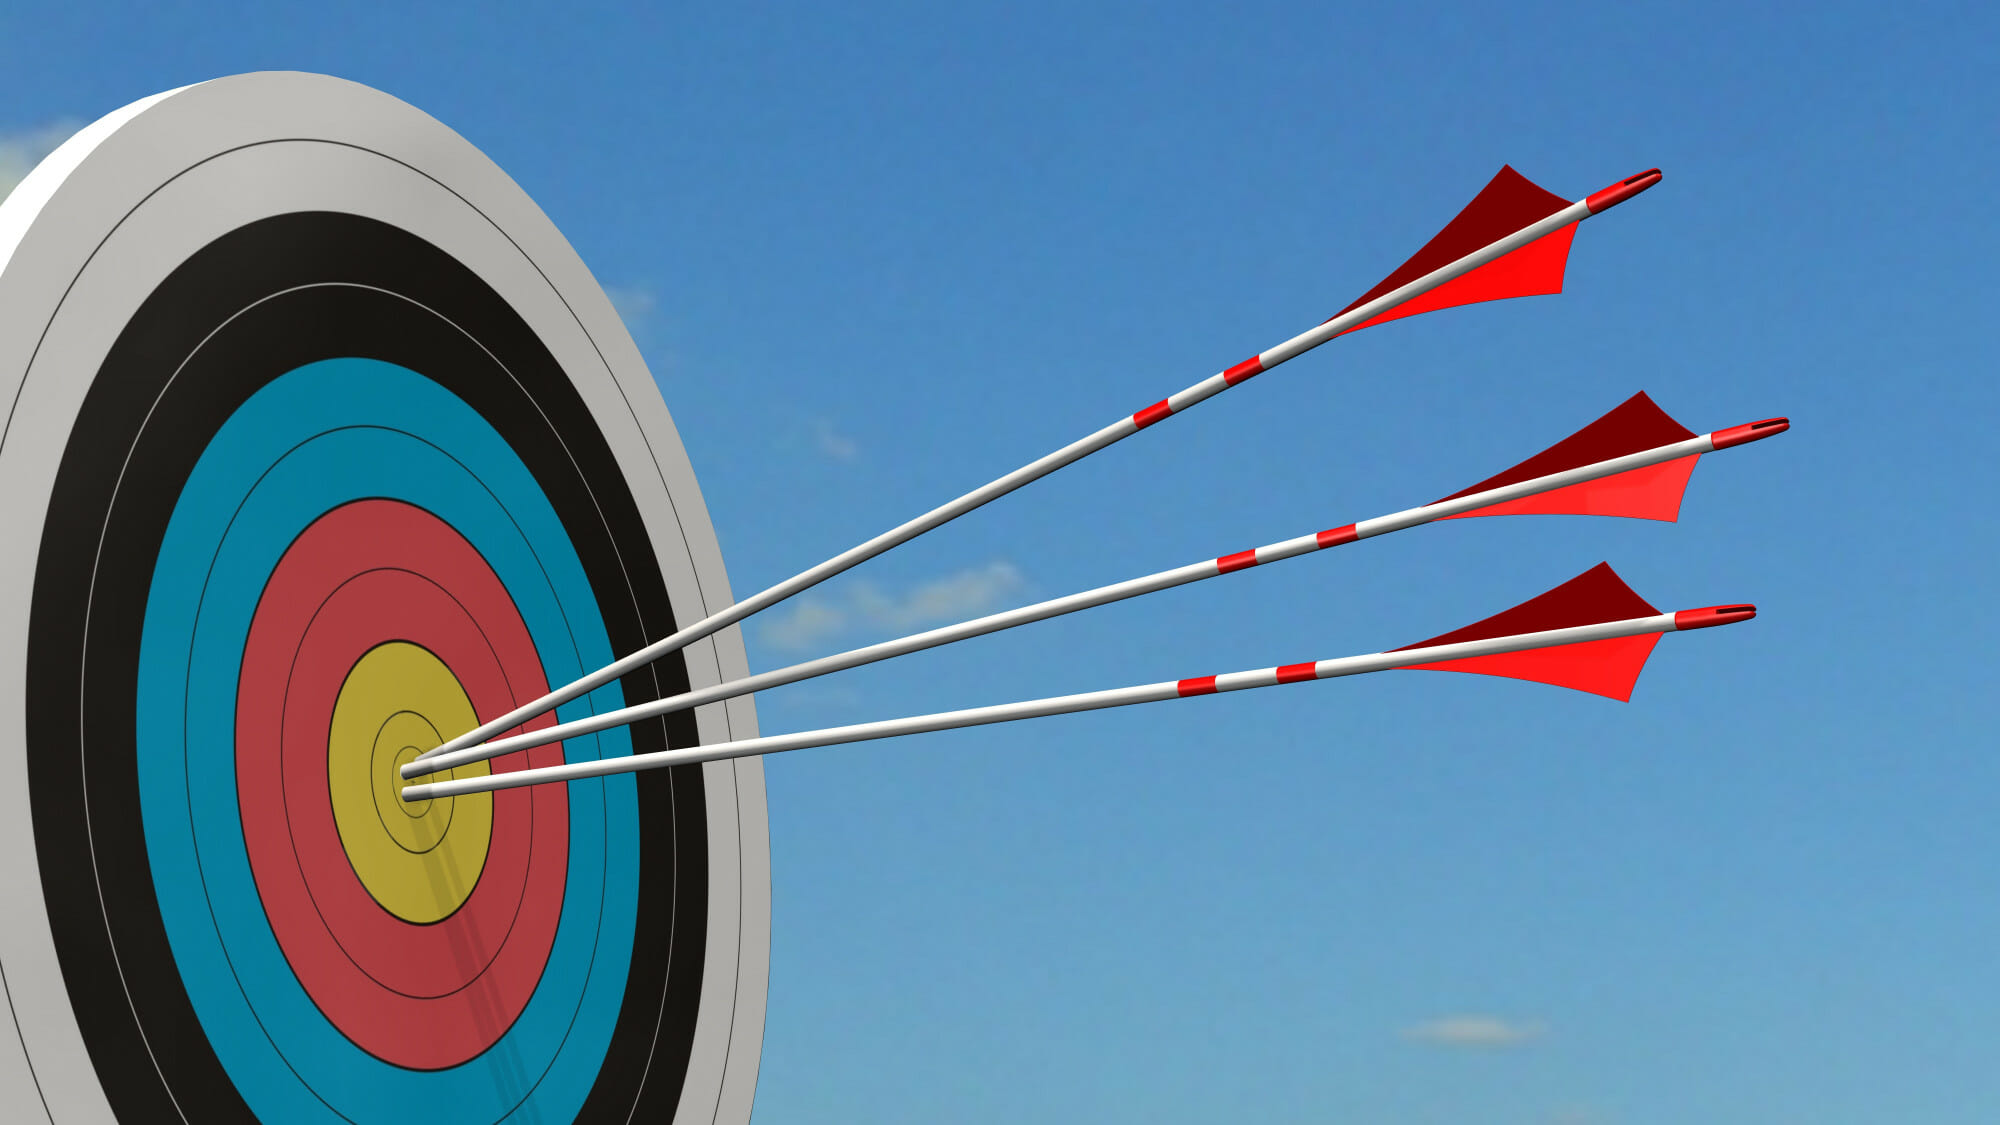 This image shows arrows hitting the bullseye. So how do you hit the bullseye when choosing a wealth manager?